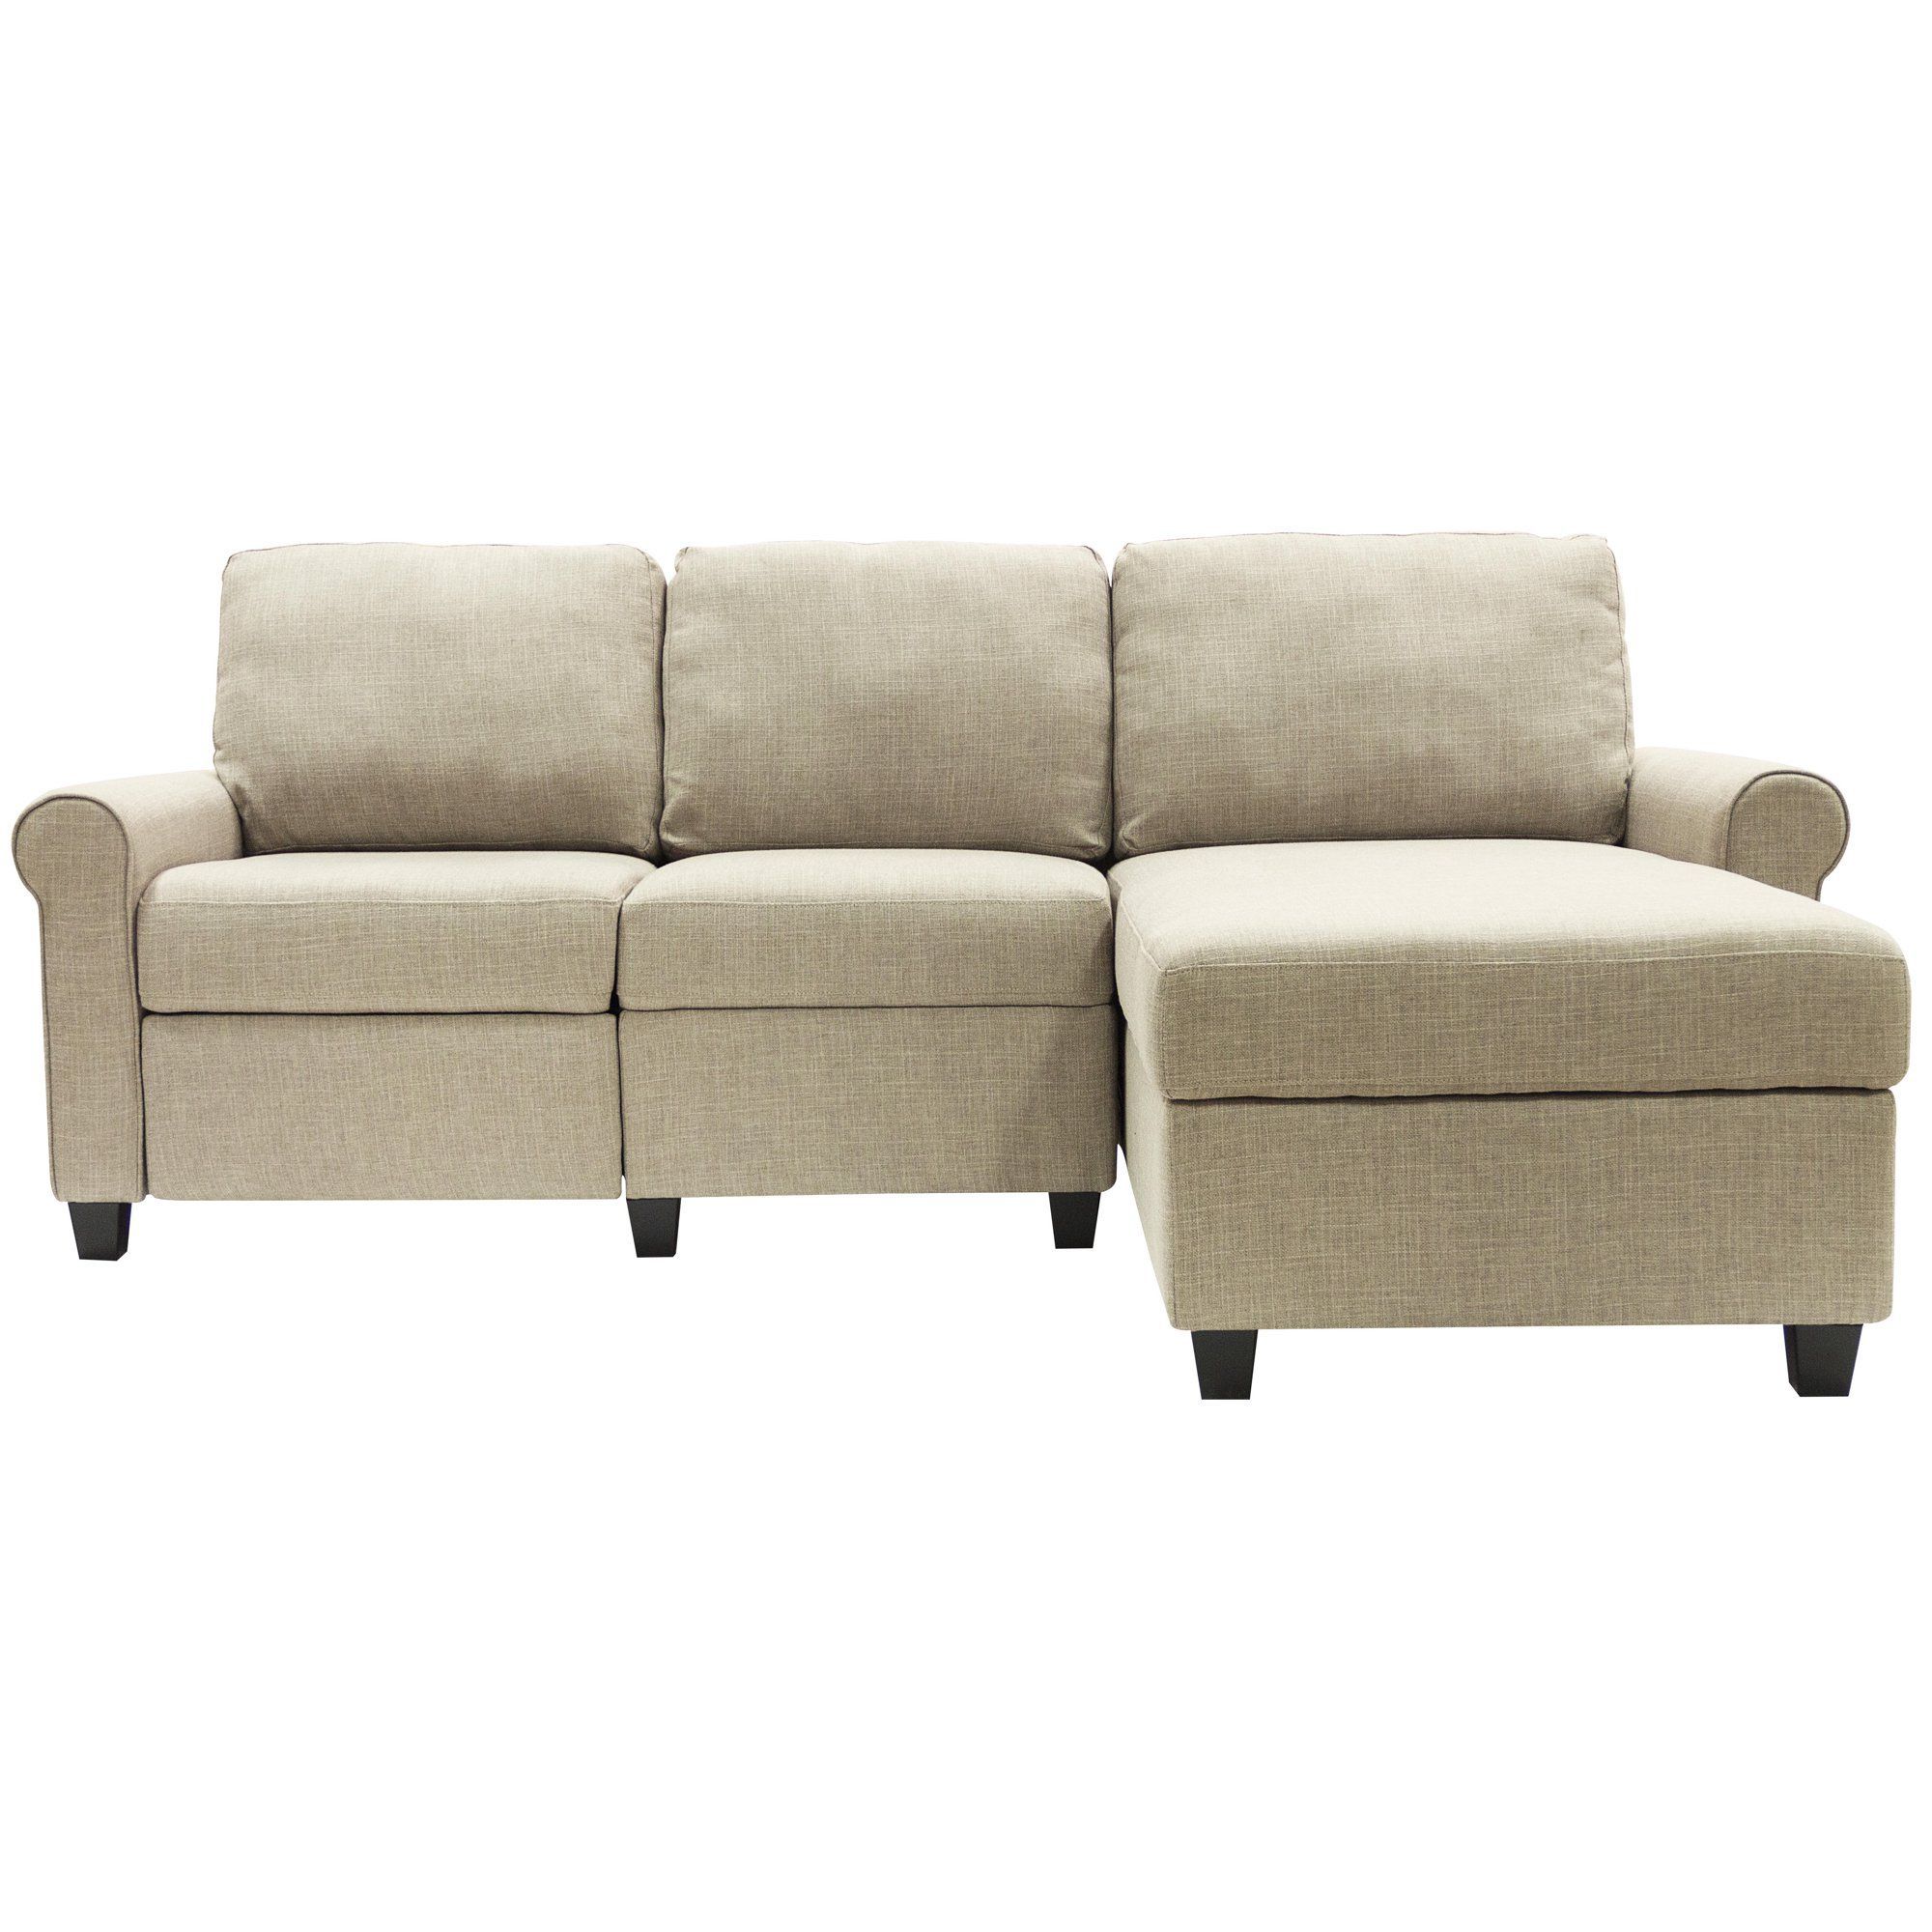 Serta Copenhagen Reclining Sectional With Right Storage Within Copenhagen Reclining Sectional Sofas With Left Storage Chaise (View 12 of 15)